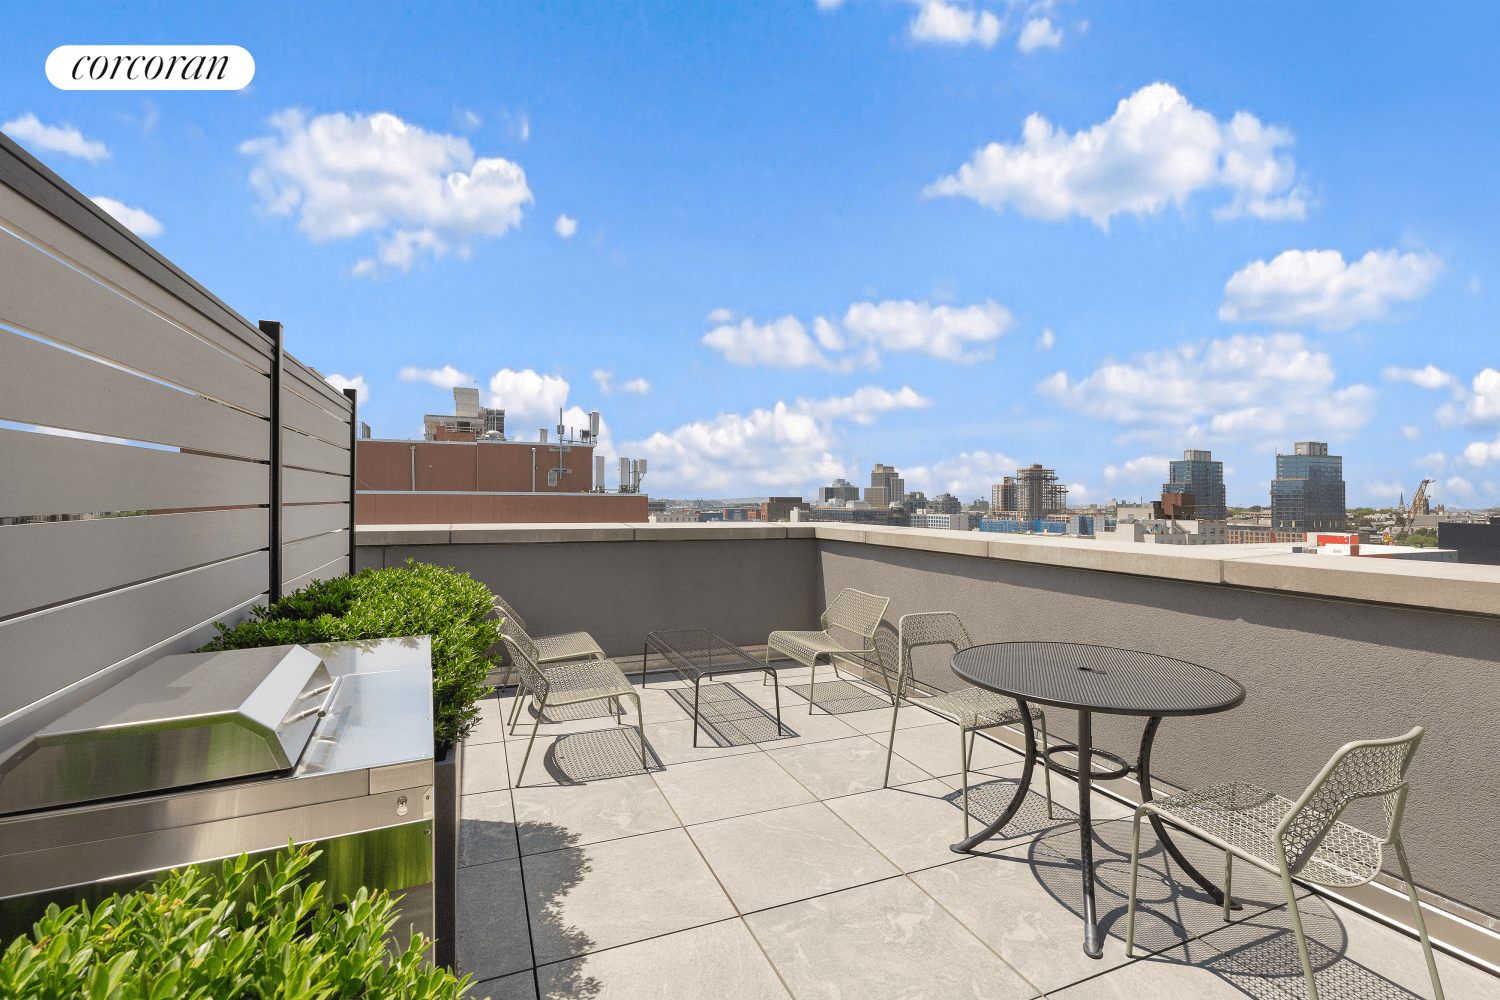 Immediate Closings 50 SoldPenthouse 9 at 601 BalticThree Bedrooms Private Terrace of 215 Square FeetThoughtfully designed, meticulously executed.